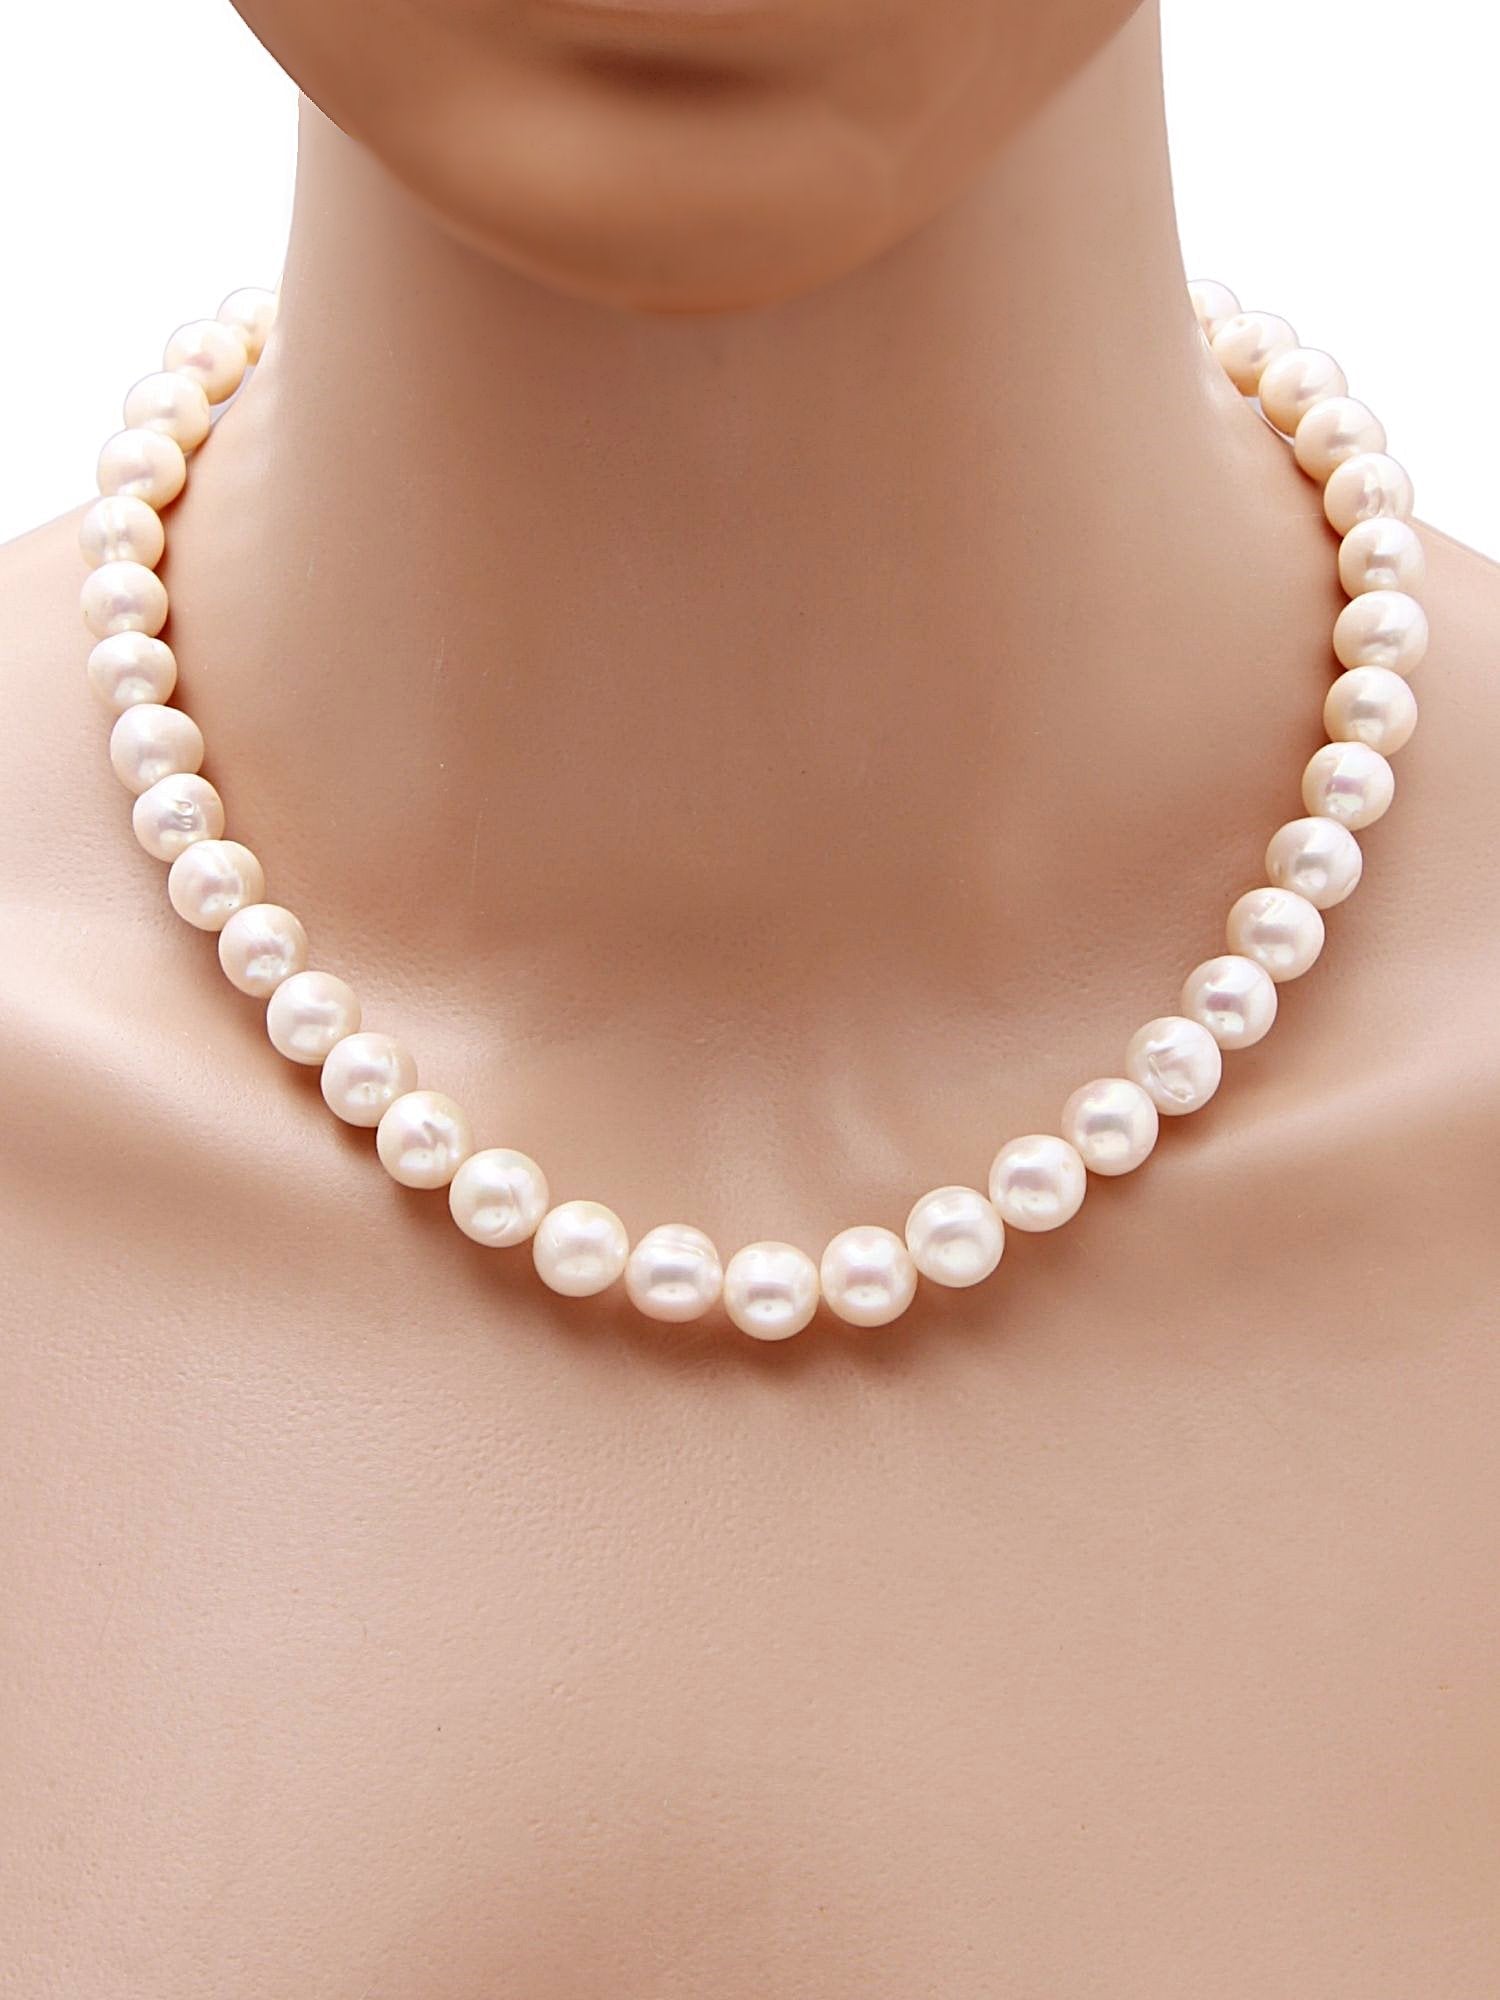 High Luster White Freshwater Pearls (Big Bead Size) Necklace - 282 Carats - (F1026)